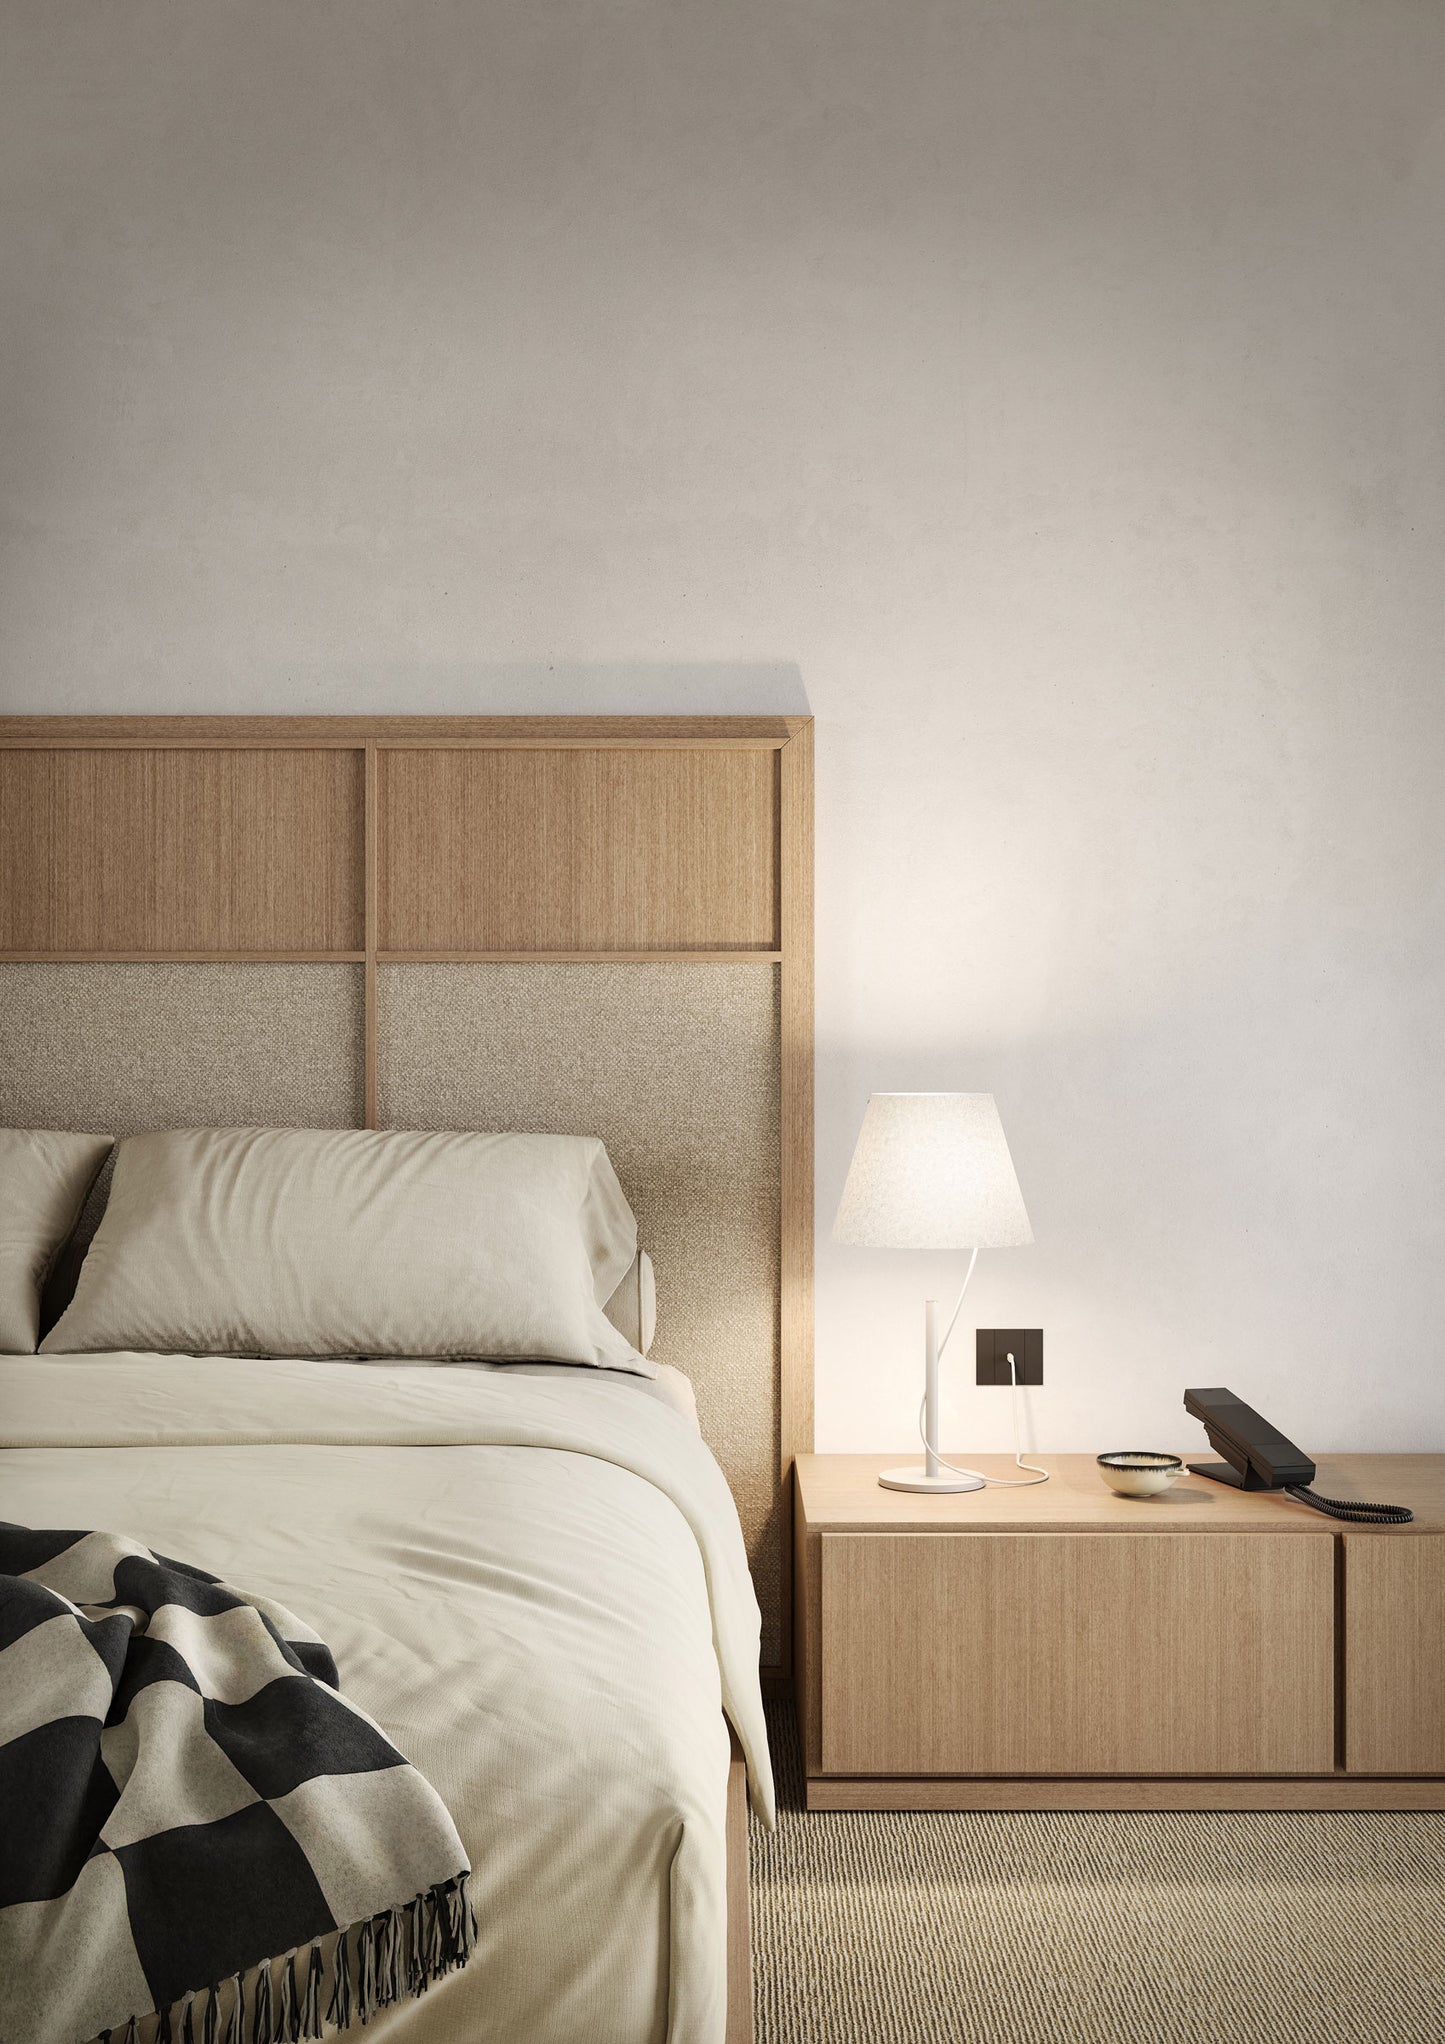 LODES Hover Table Lamp - $880.00